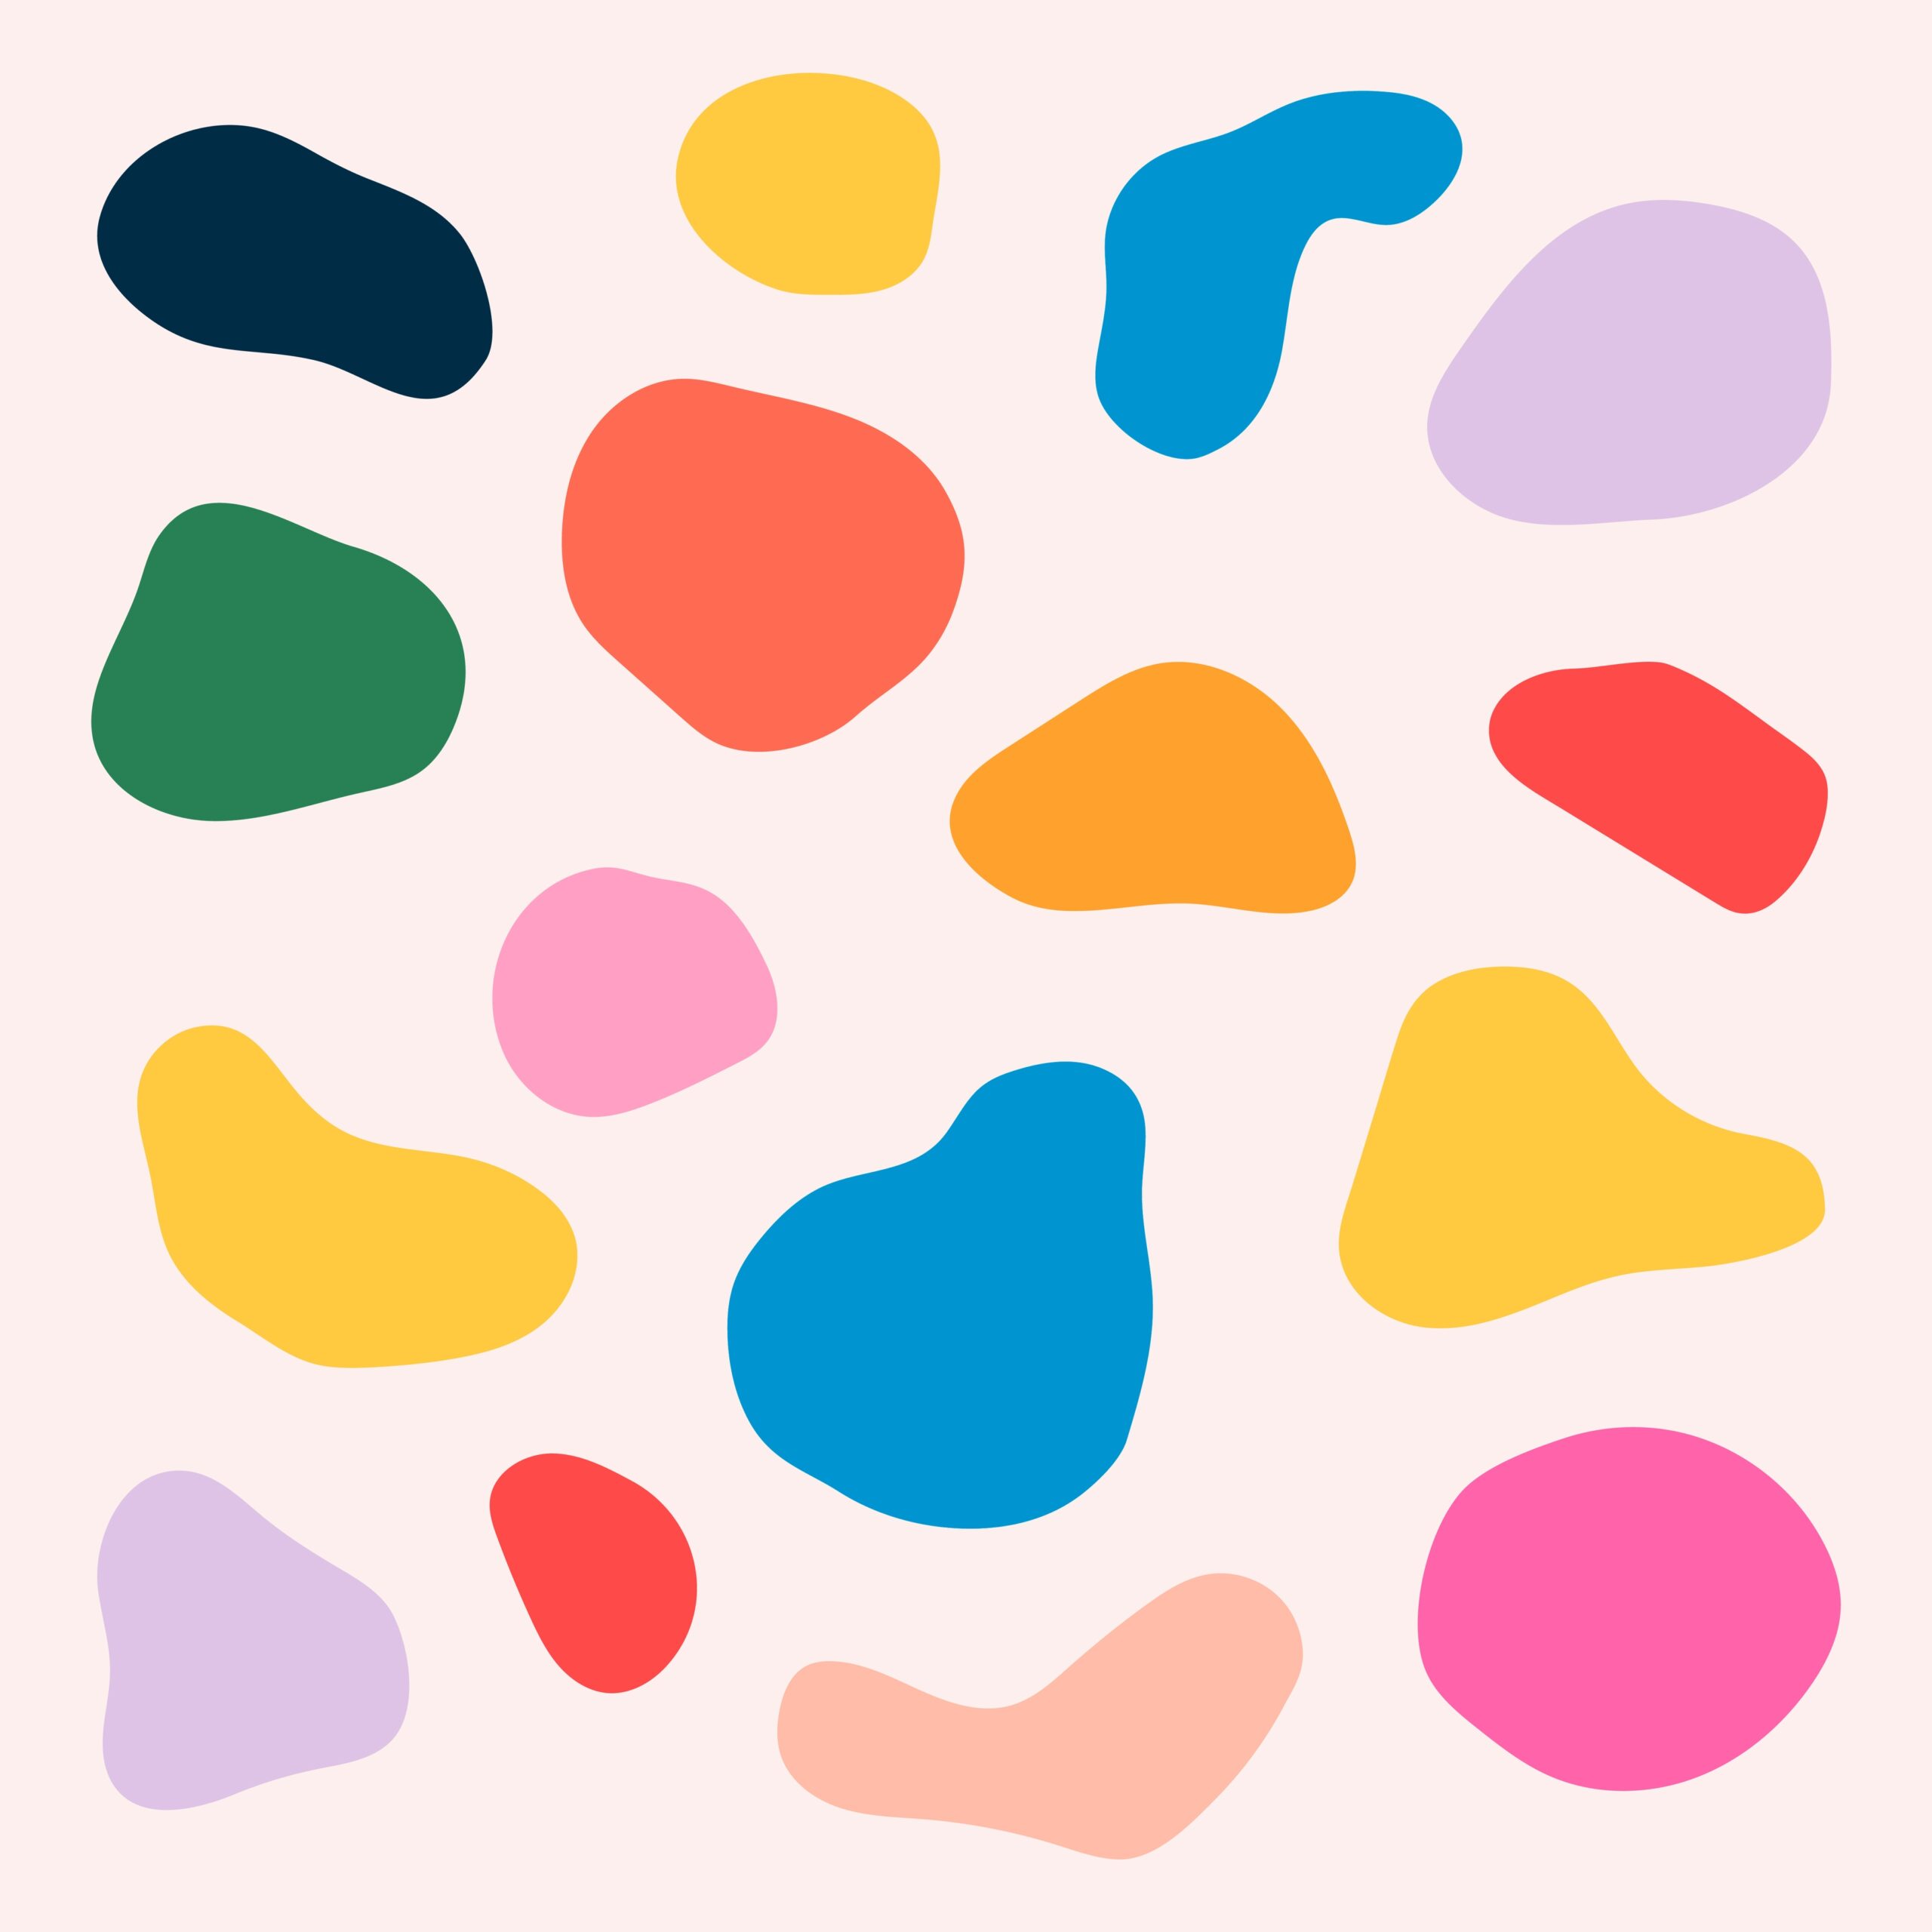 Colorful abstract shapes sticker vector set by RawPixel